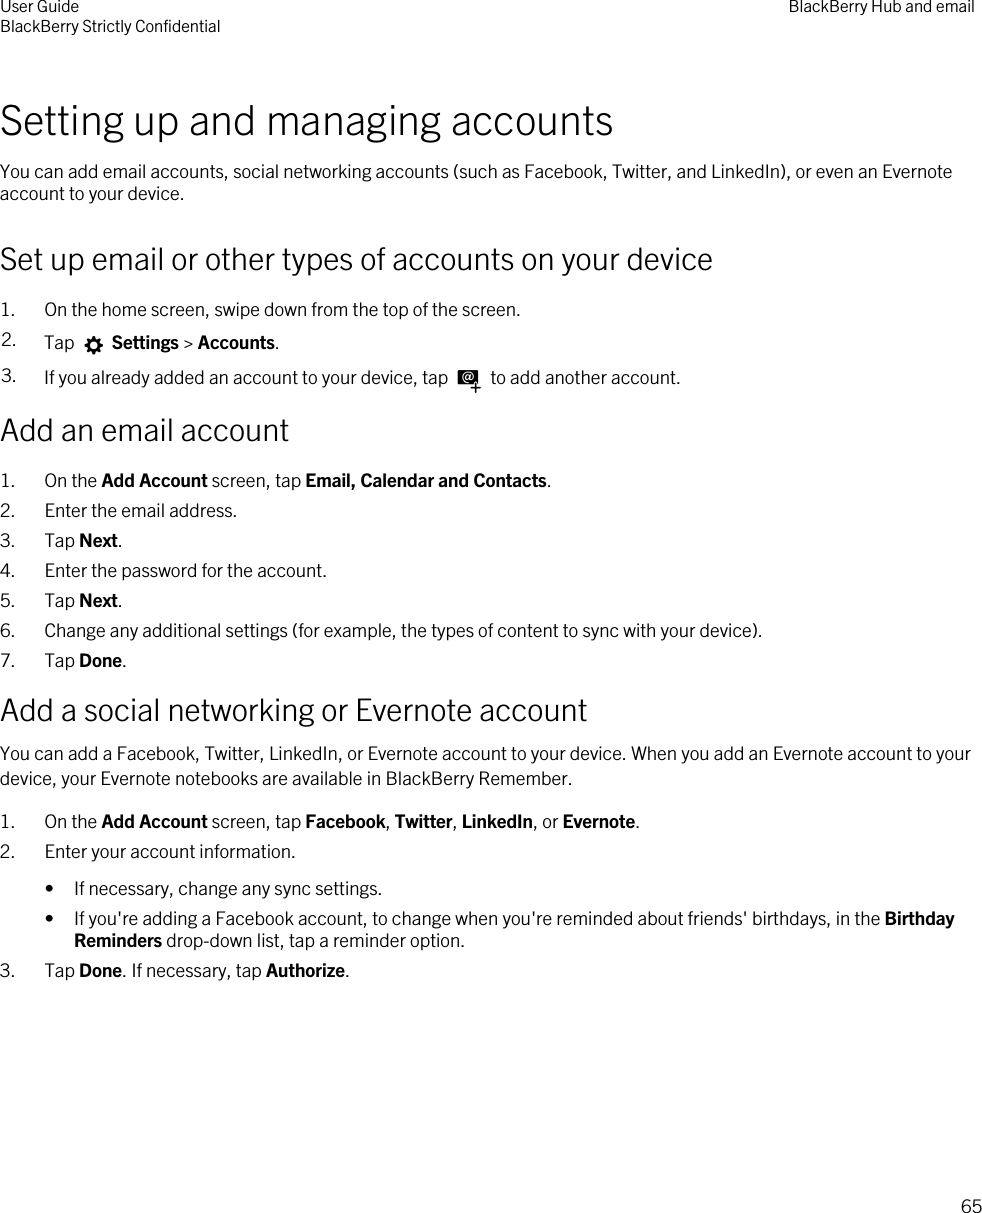 Setting up and managing accountsYou can add email accounts, social networking accounts (such as Facebook, Twitter, and LinkedIn), or even an Evernote account to your device.Set up email or other types of accounts on your device1. On the home screen, swipe down from the top of the screen.2. Tap   Settings &gt; Accounts.3. If you already added an account to your device, tap   to add another account.Add an email account1. On the Add Account screen, tap Email, Calendar and Contacts.2. Enter the email address.3. Tap Next.4. Enter the password for the account.5. Tap Next.6. Change any additional settings (for example, the types of content to sync with your device).7. Tap Done.Add a social networking or Evernote accountYou can add a Facebook, Twitter, LinkedIn, or Evernote account to your device. When you add an Evernote account to your device, your Evernote notebooks are available in BlackBerry Remember.1. On the Add Account screen, tap Facebook, Twitter, LinkedIn, or Evernote.2. Enter your account information.• If necessary, change any sync settings.• If you&apos;re adding a Facebook account, to change when you&apos;re reminded about friends&apos; birthdays, in the Birthday Reminders drop-down list, tap a reminder option.3. Tap Done. If necessary, tap Authorize.User GuideBlackBerry Strictly Confidential BlackBerry Hub and email65